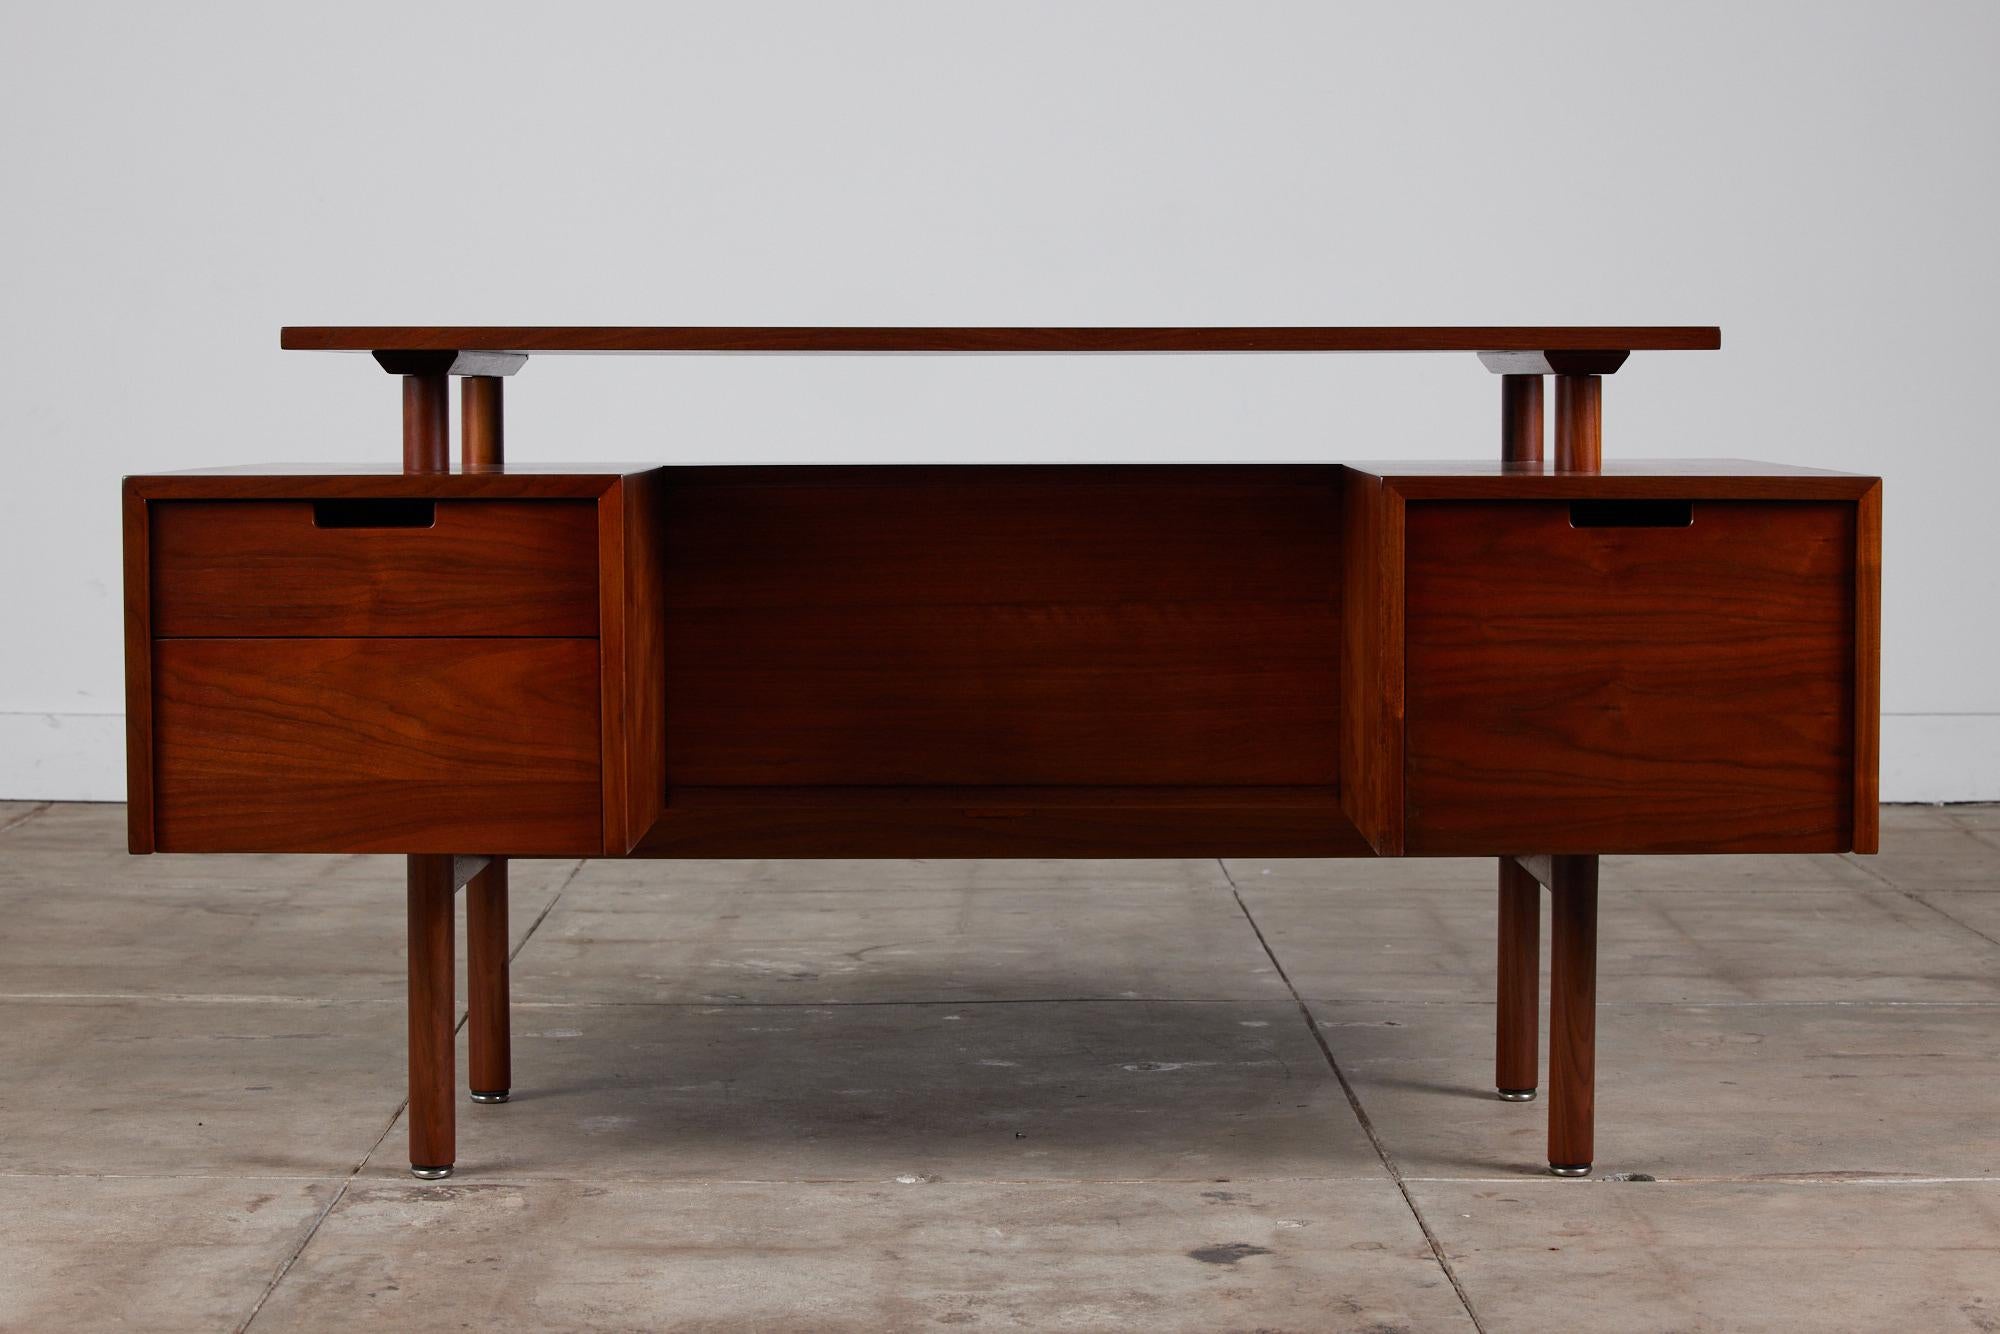 Classic California design, c.1950s, a walnut executive desk with a broad floating writing surface by Milo Baughman. This piece features three storage drawers, one large one and two smaller drawers. The front of the desk showcases a shelf that runs